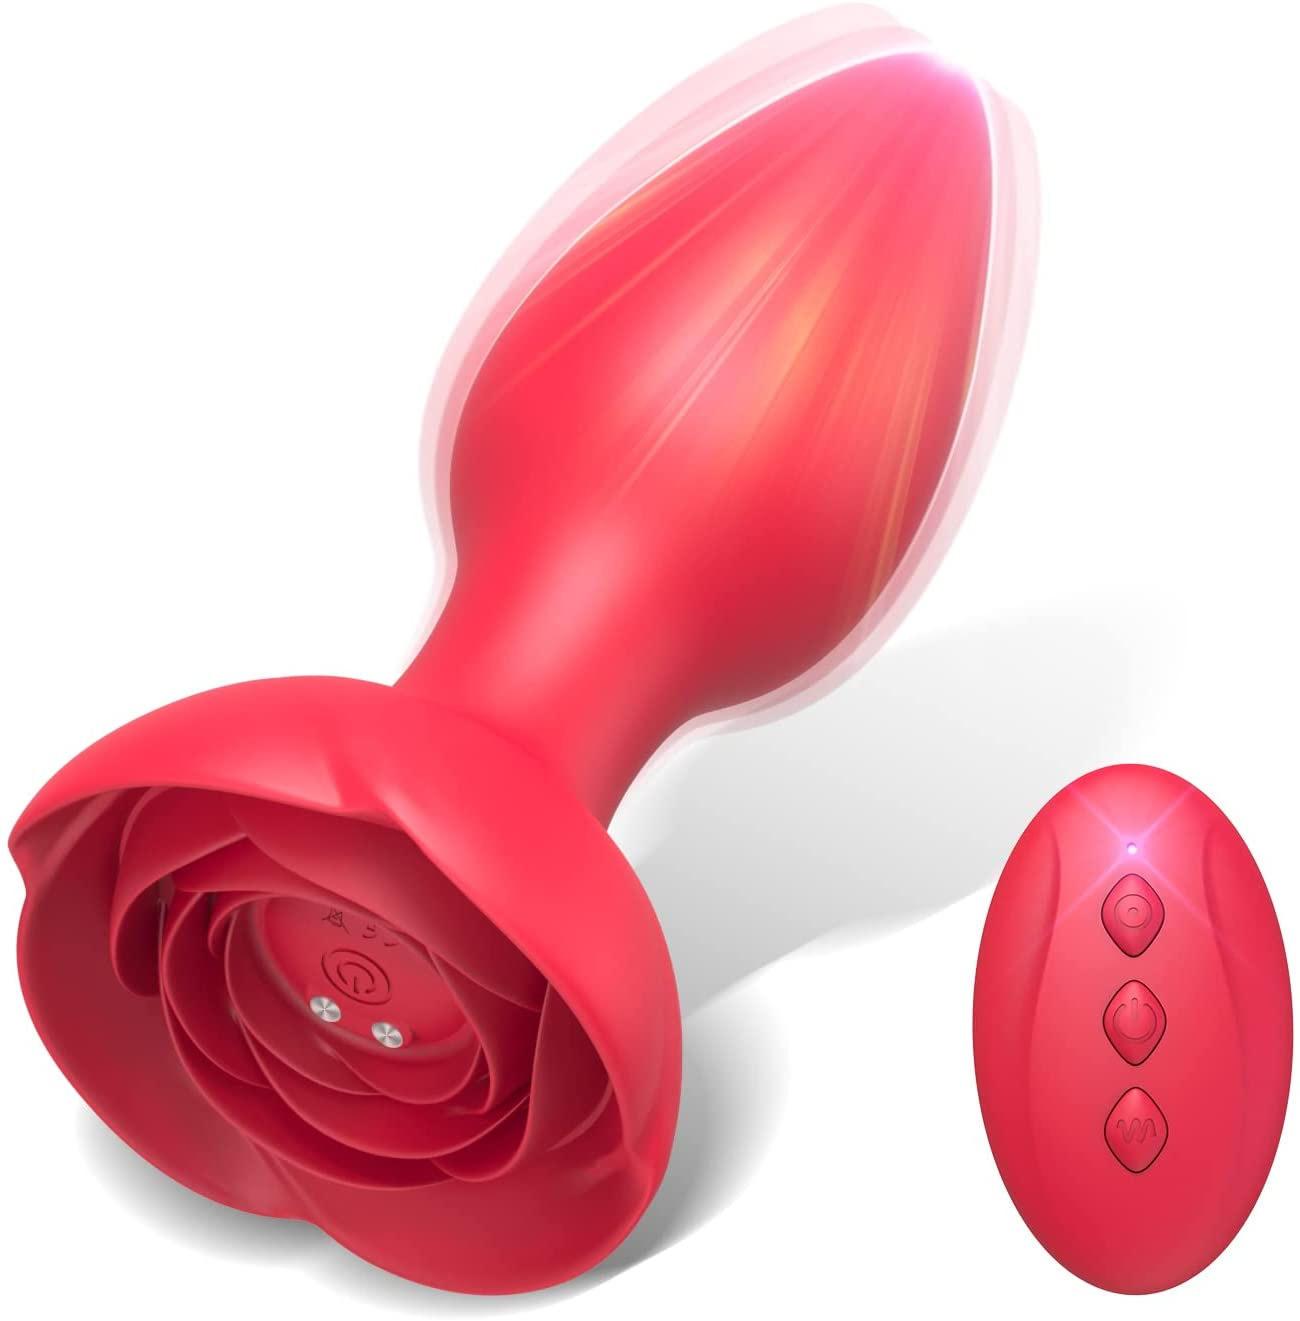  2023 Wholesale Adult Man Gay Women Sex Toy Silicone Butt Plug Female Rose Anal Vibrator